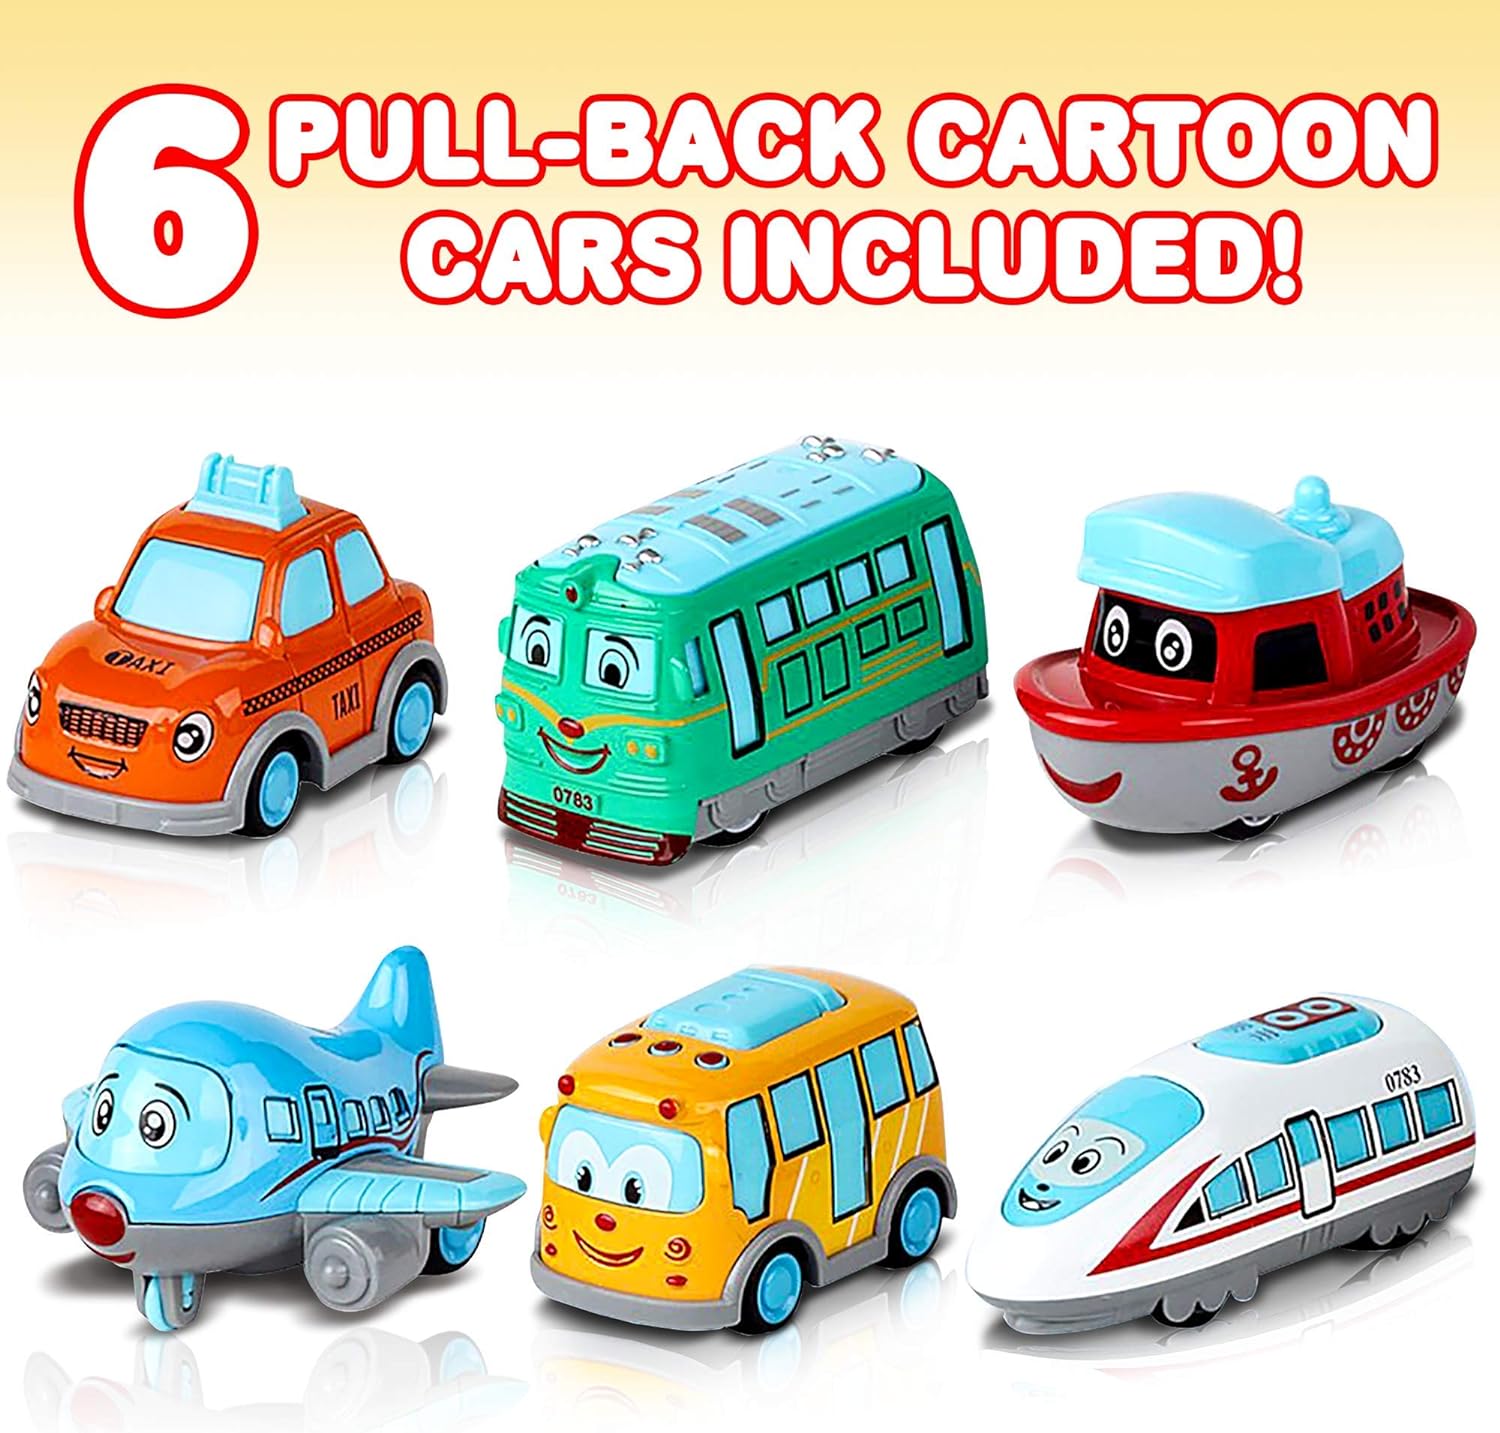 ArtCreativity Metal Cartoon Car Set - Set of 6 Mini Pullback Toy Cars - Pullback Train, Bus, Taxi, Tram, Plane and Ship - Party Favors, Best Birthday Gift for Boys, Girls, Toddlers